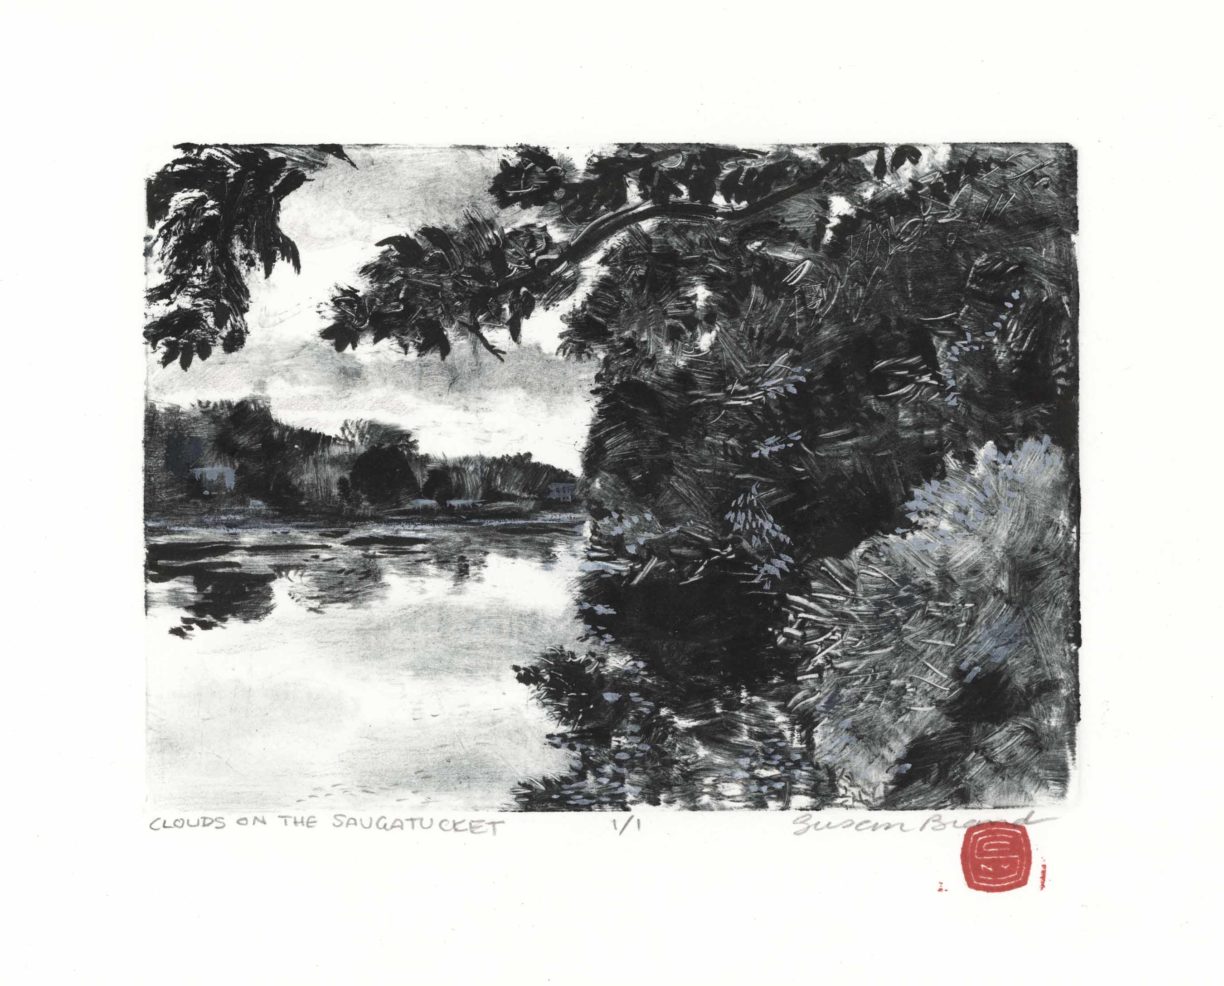 Clouds On The Saugatucket, 5x7 inches, monotype, Private Collection